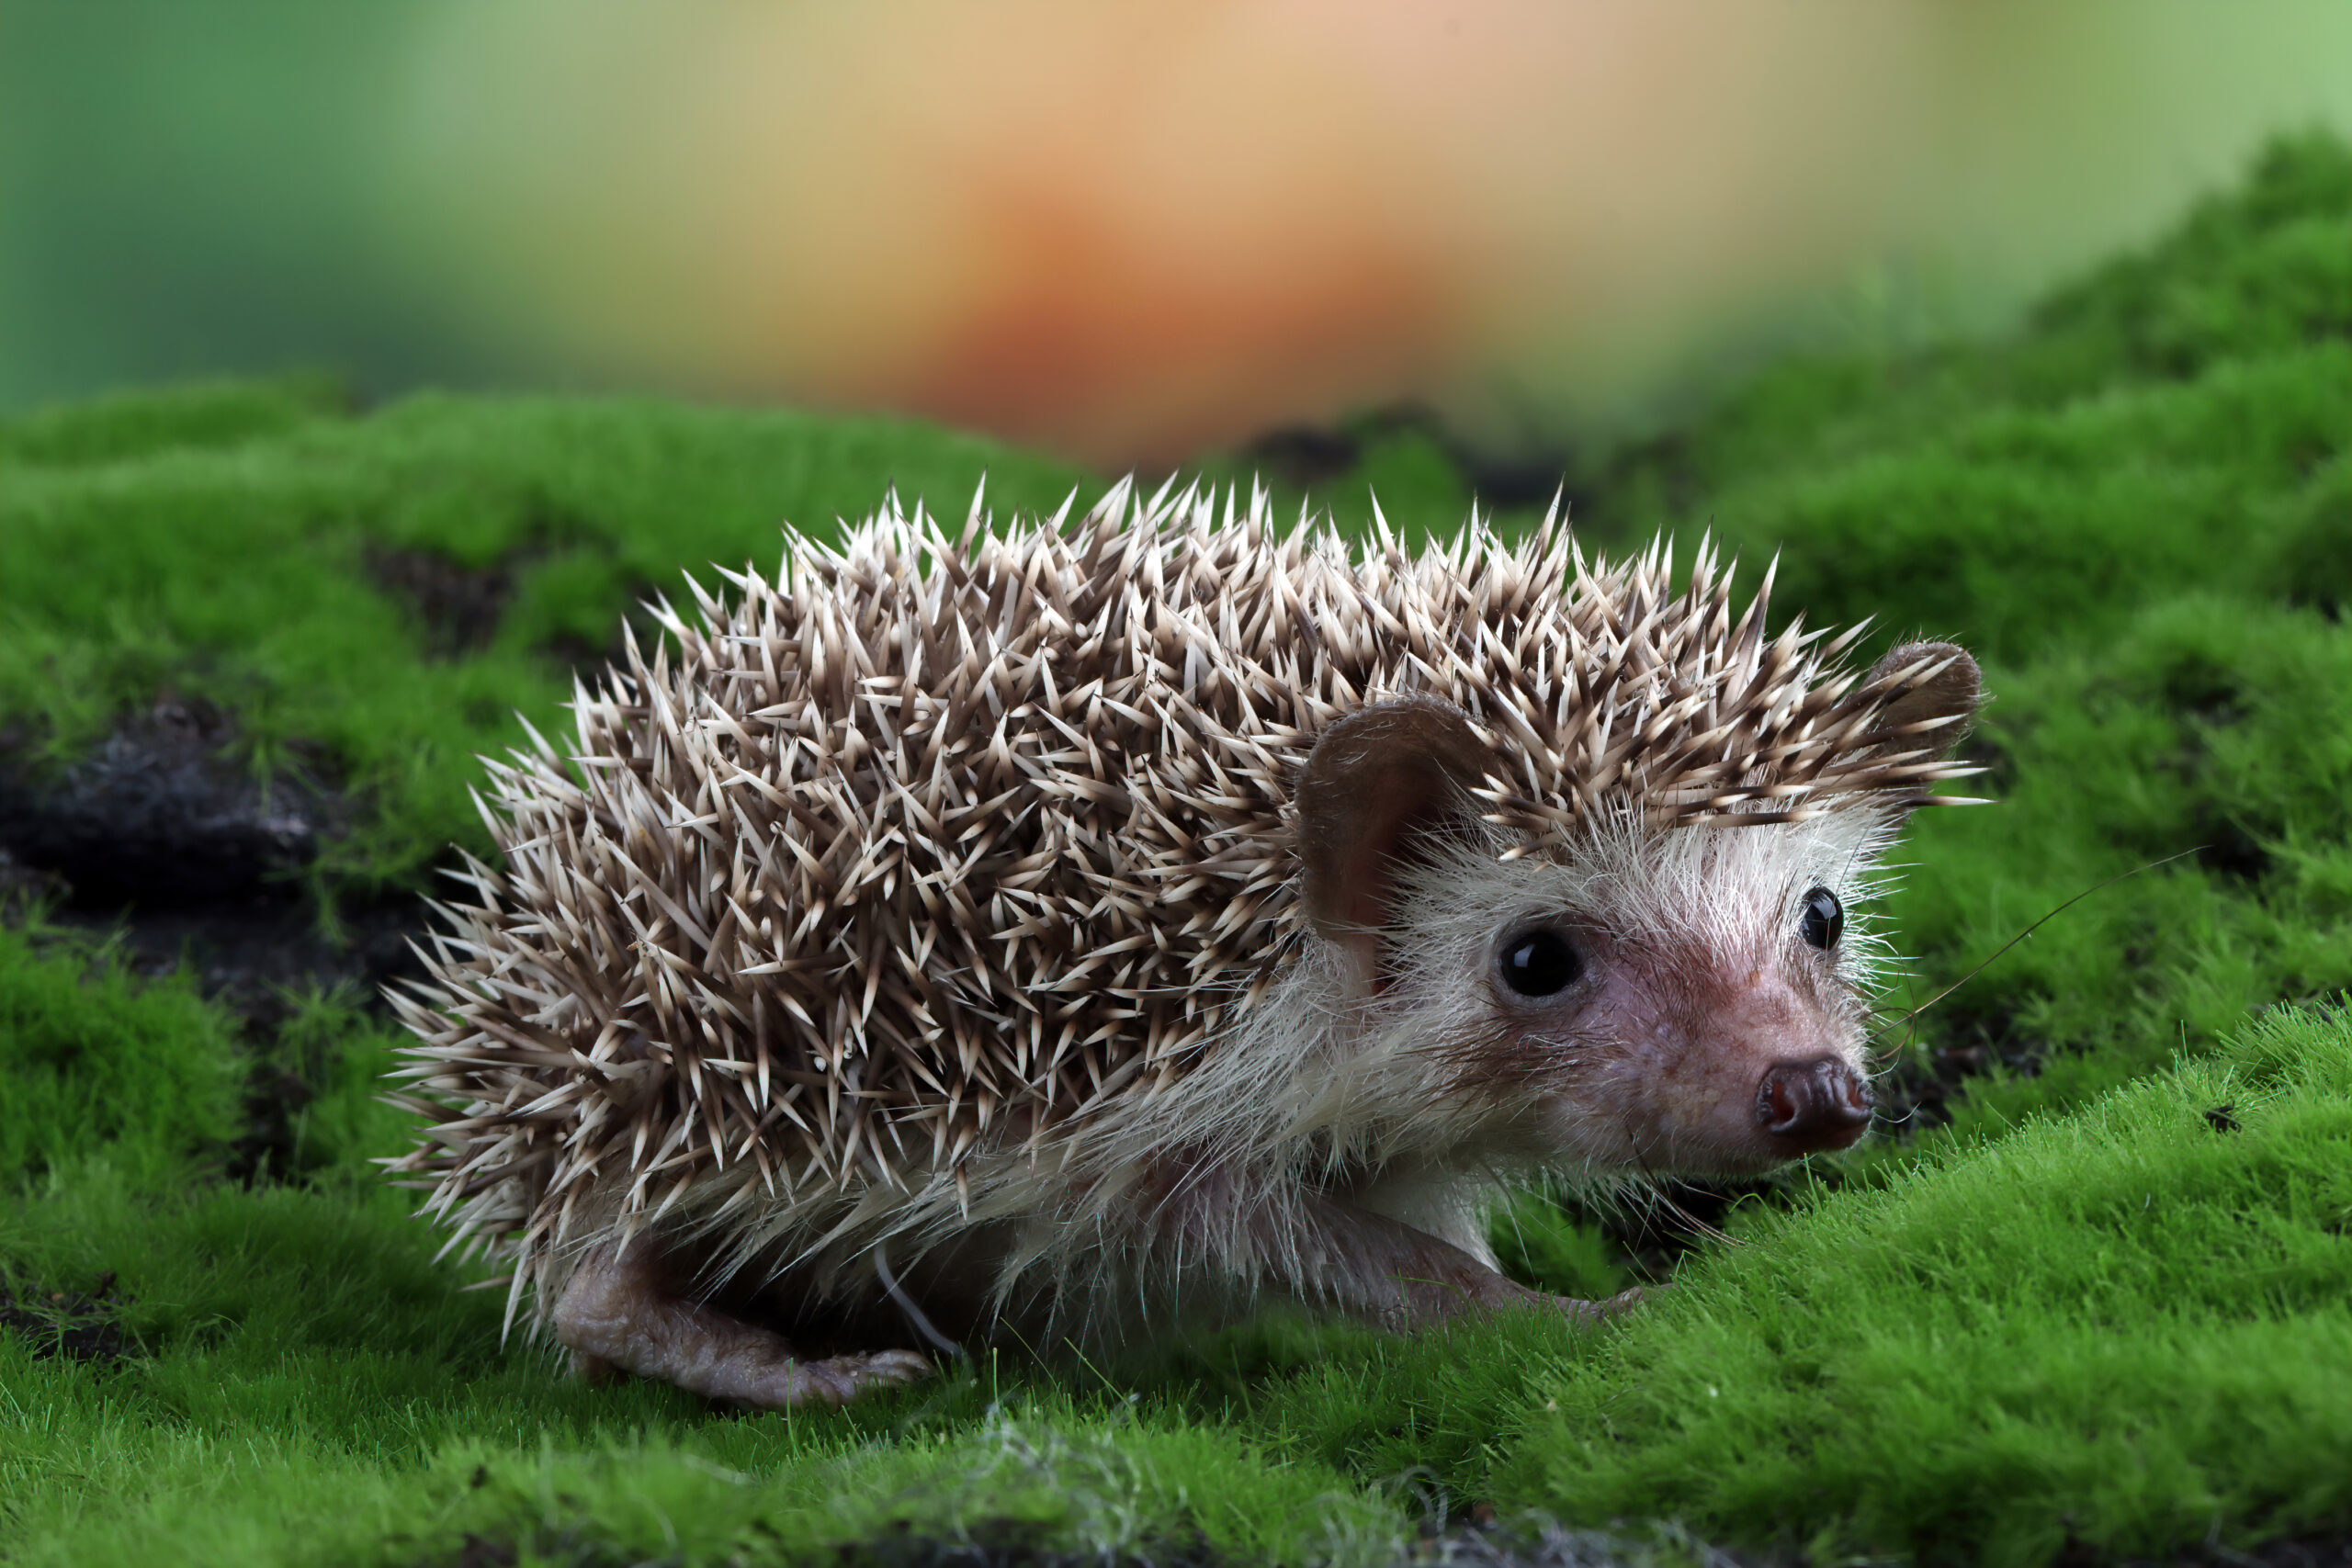 How fast can hedgehogs run?